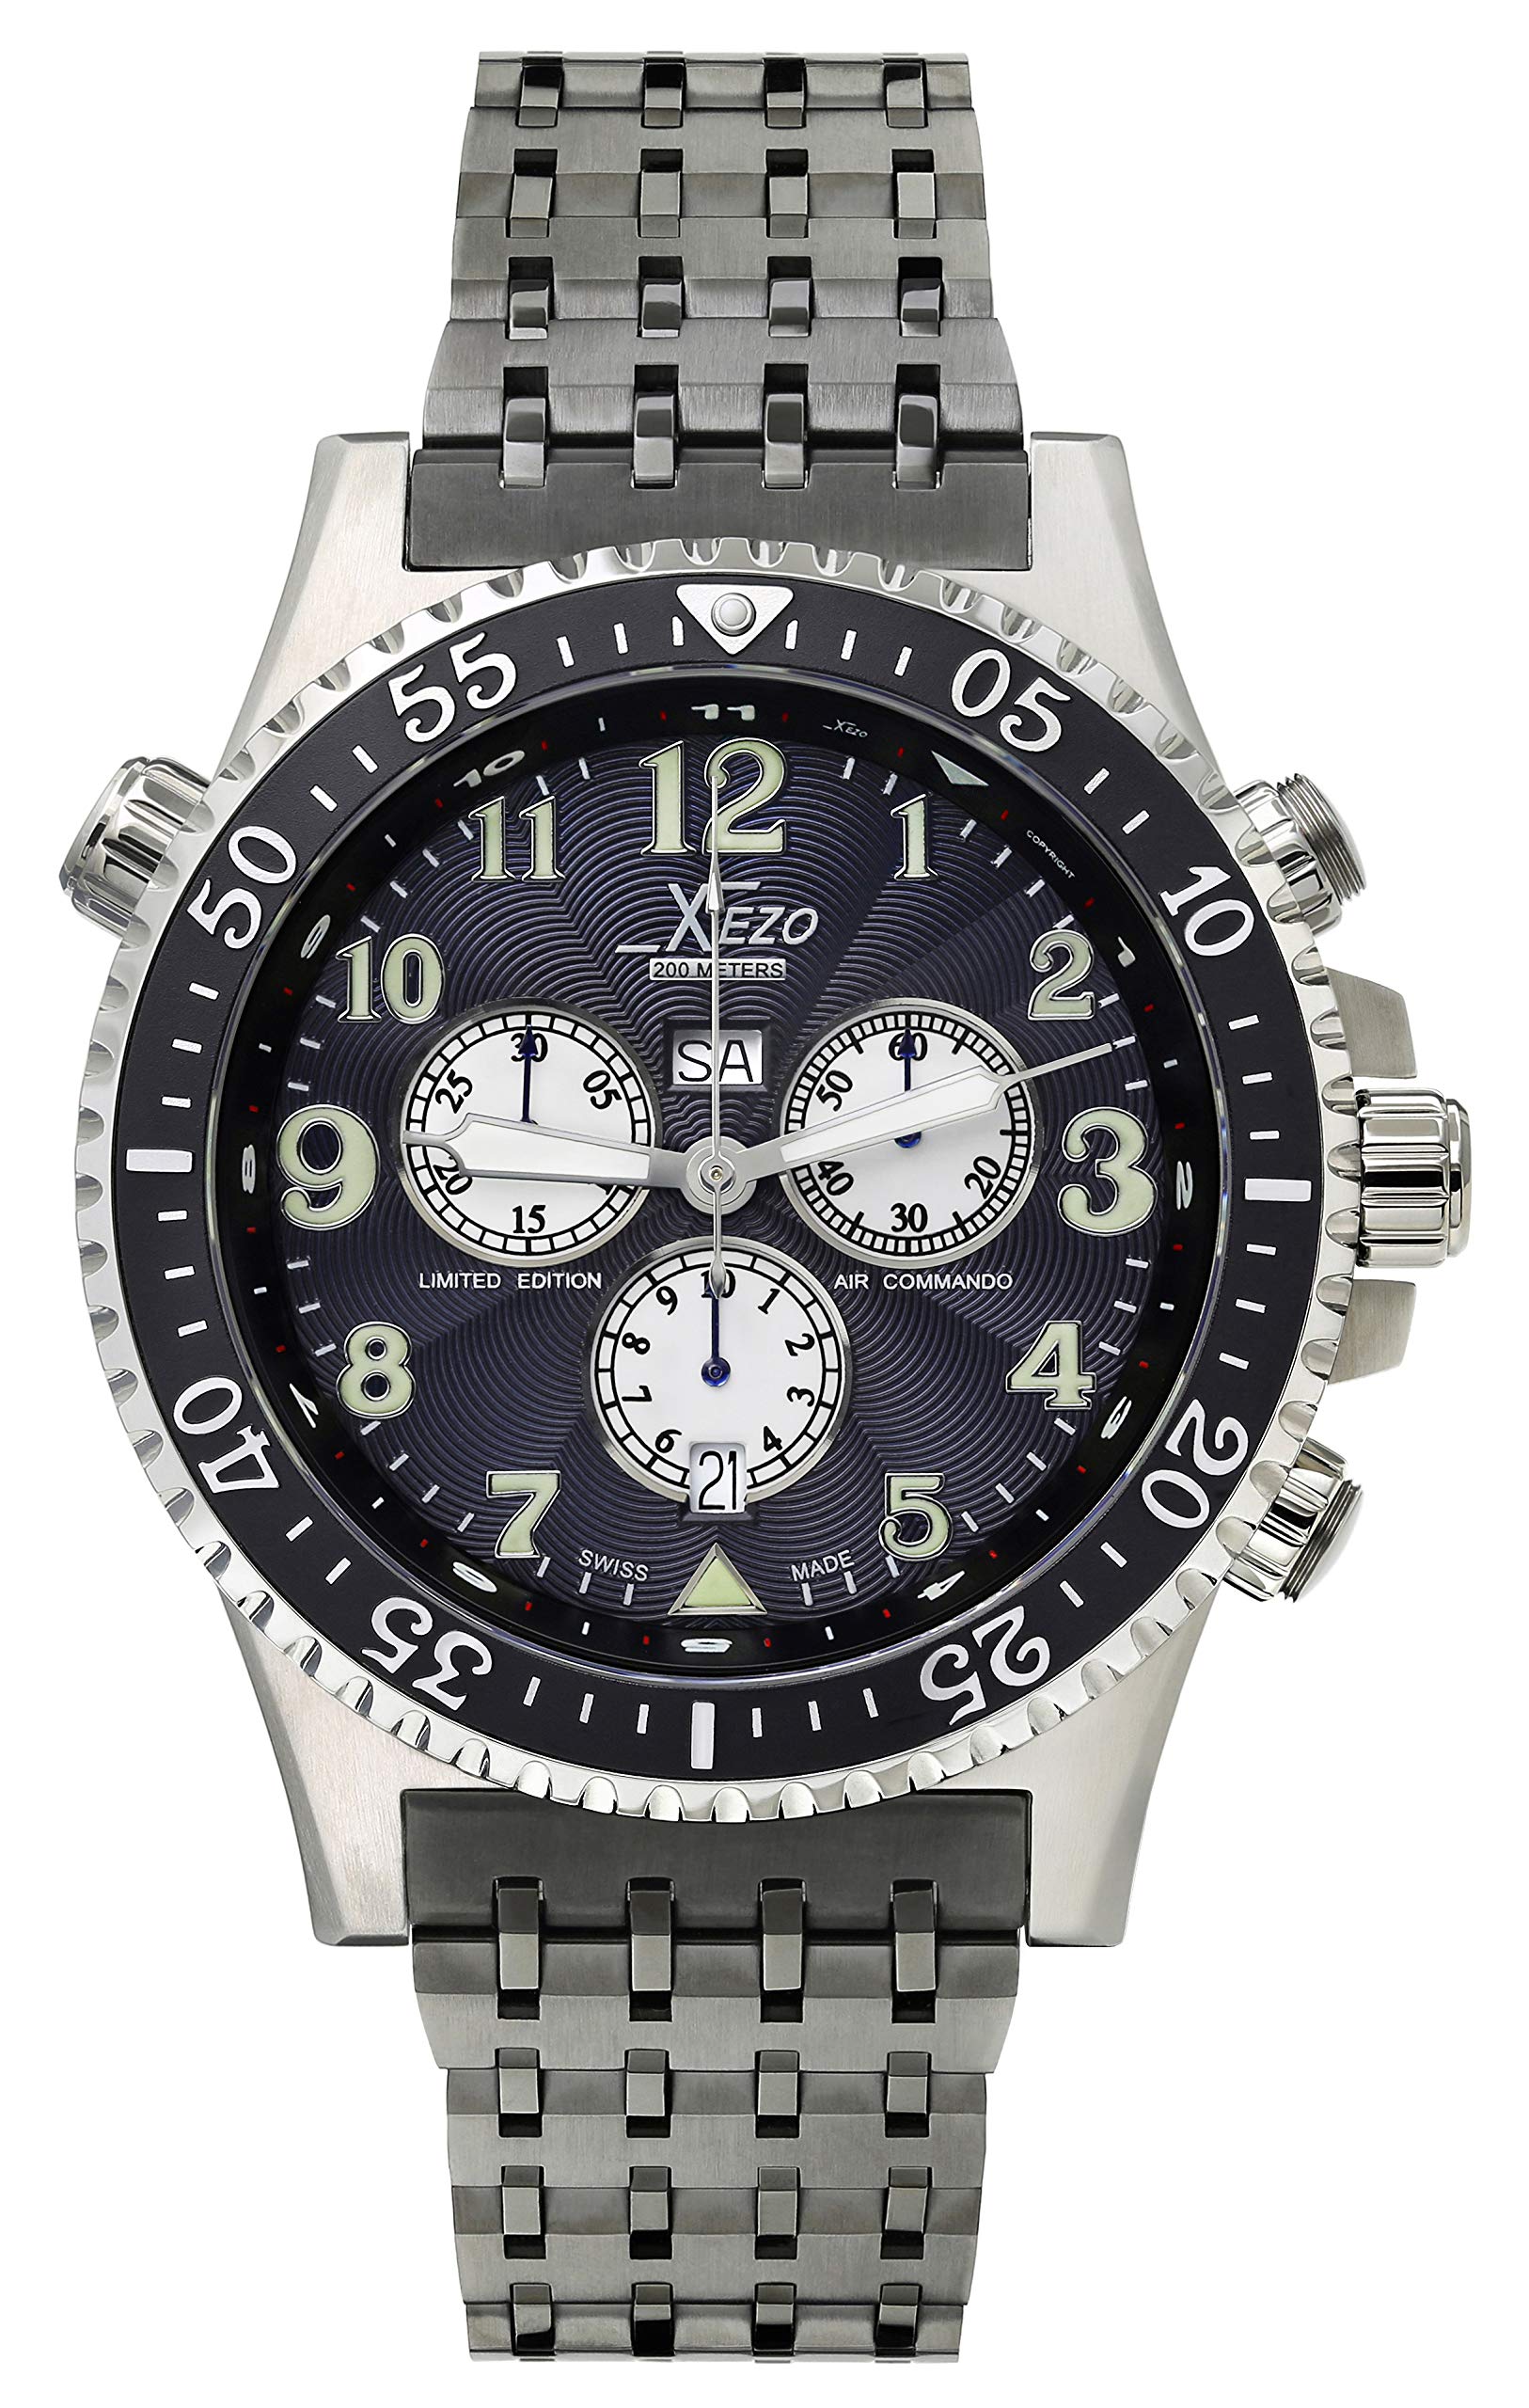 Xezo Air Commando Mens Swiss Made Vintage Style Pilots Divers Chronograph Watch 20 ATM